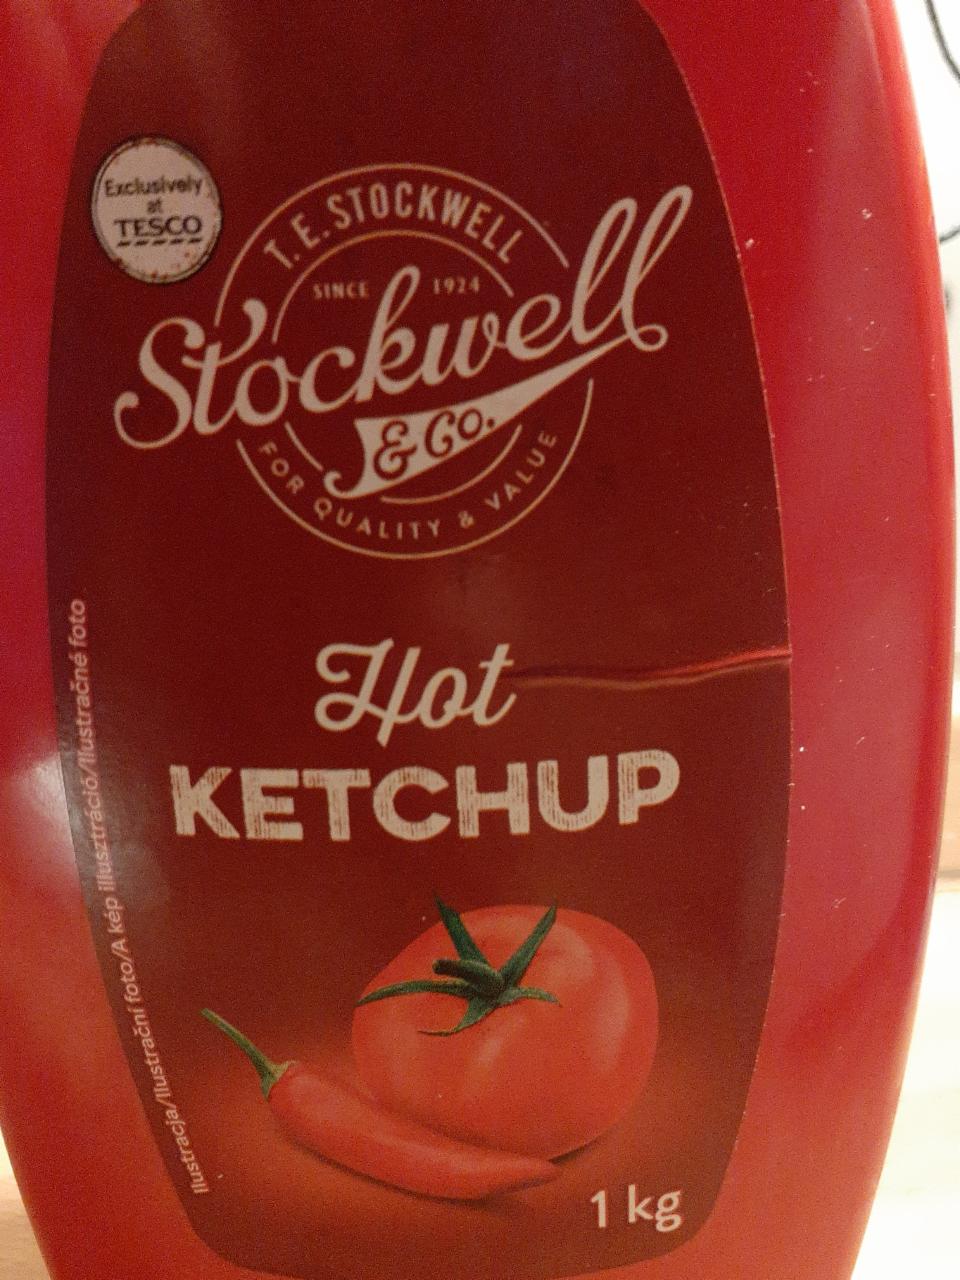 Fotografie - Hot Ketchup Stockwell & Co.